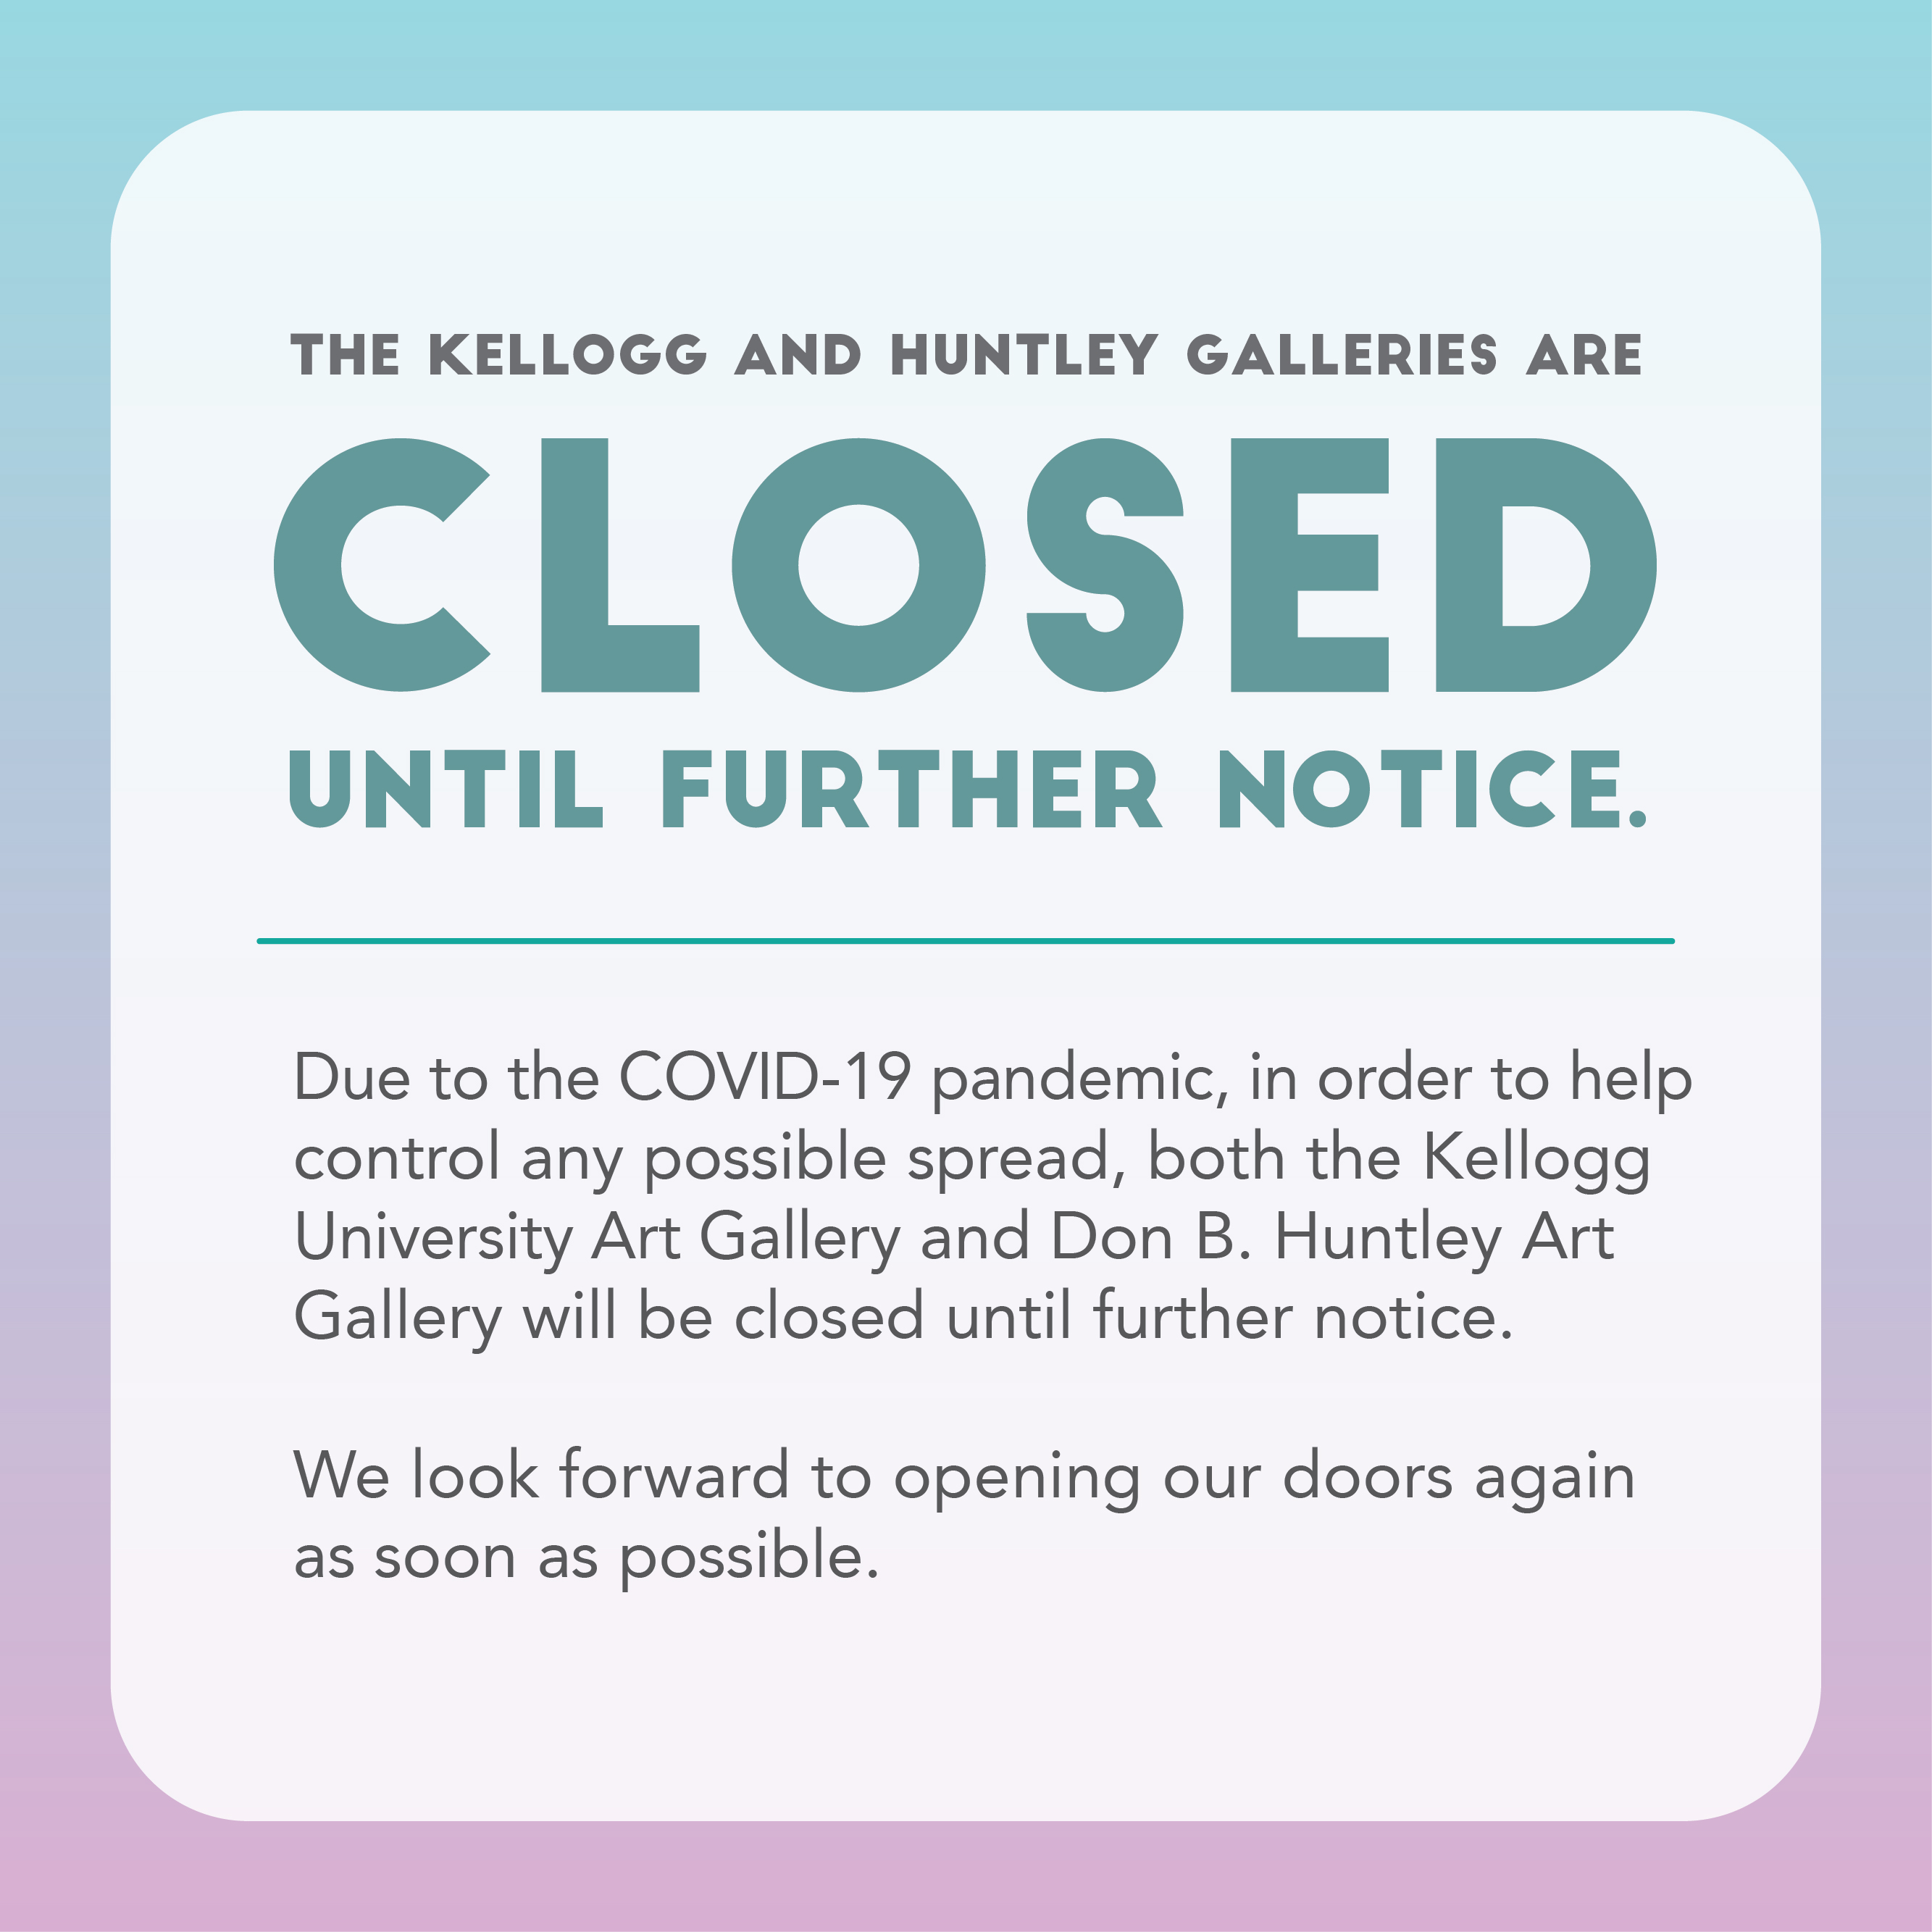 Gallery Closure Graphic stating: Due to the COVID-19 pandemic, and in order to help control any possible spread, both the Kellogg University Art Gallery and the Don B. Huntley Gallery will be closed until further notice. We look forward to opening our doors again as soon as possible! 